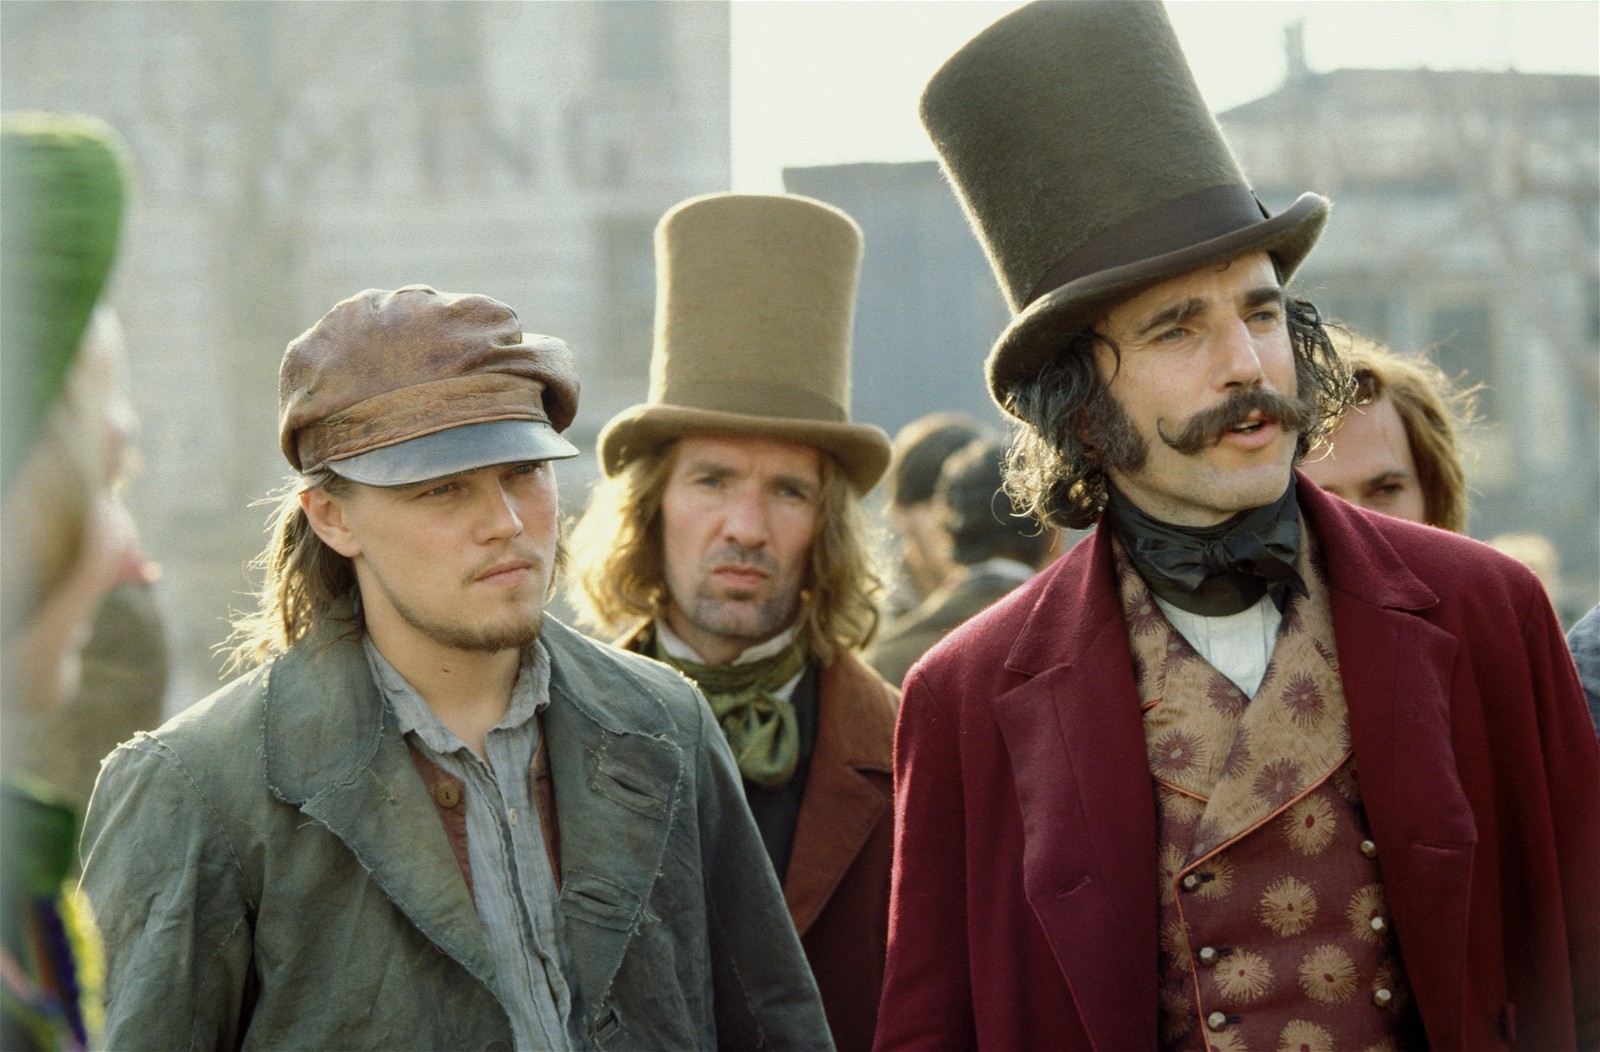 Daniel Day-Lewis worked with Martin Scorsese on two films including Gangs of New York